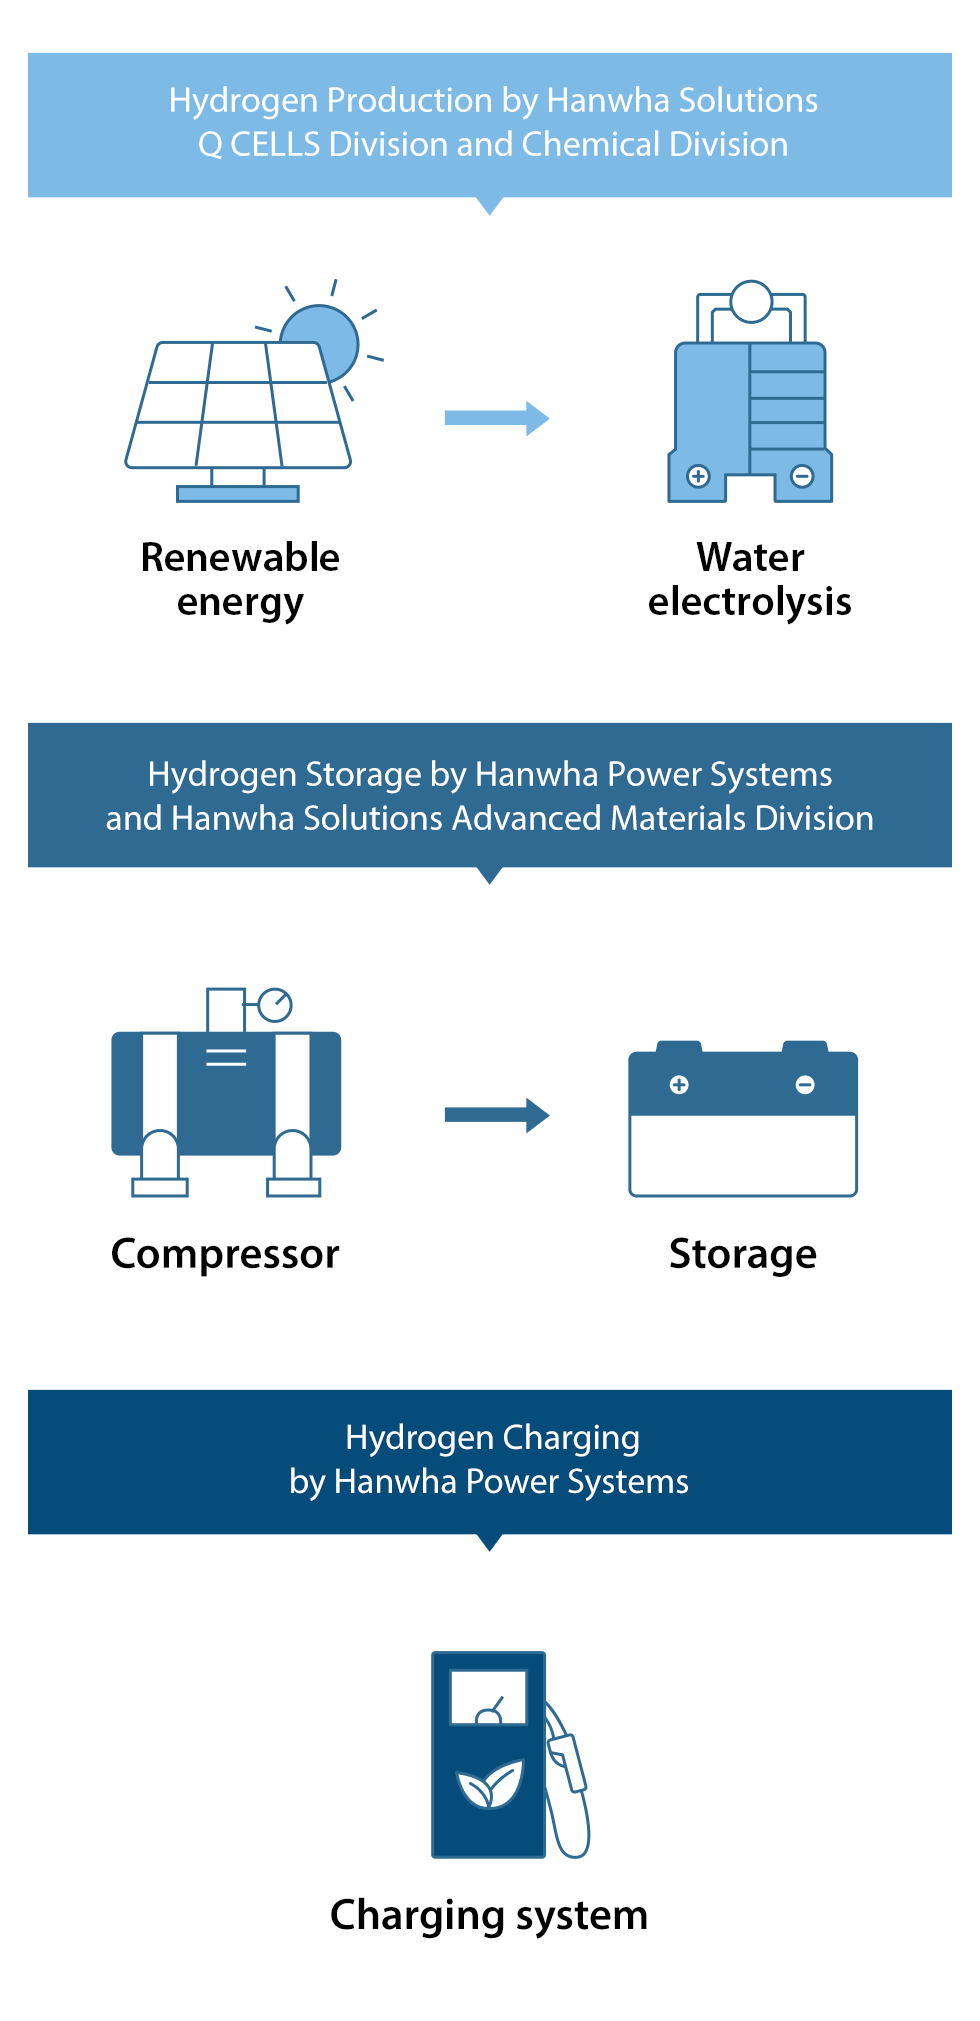 Hanwha is building up its hydrogen infrastructure to prepare for the rise of the green hydrogen renewable energy economy